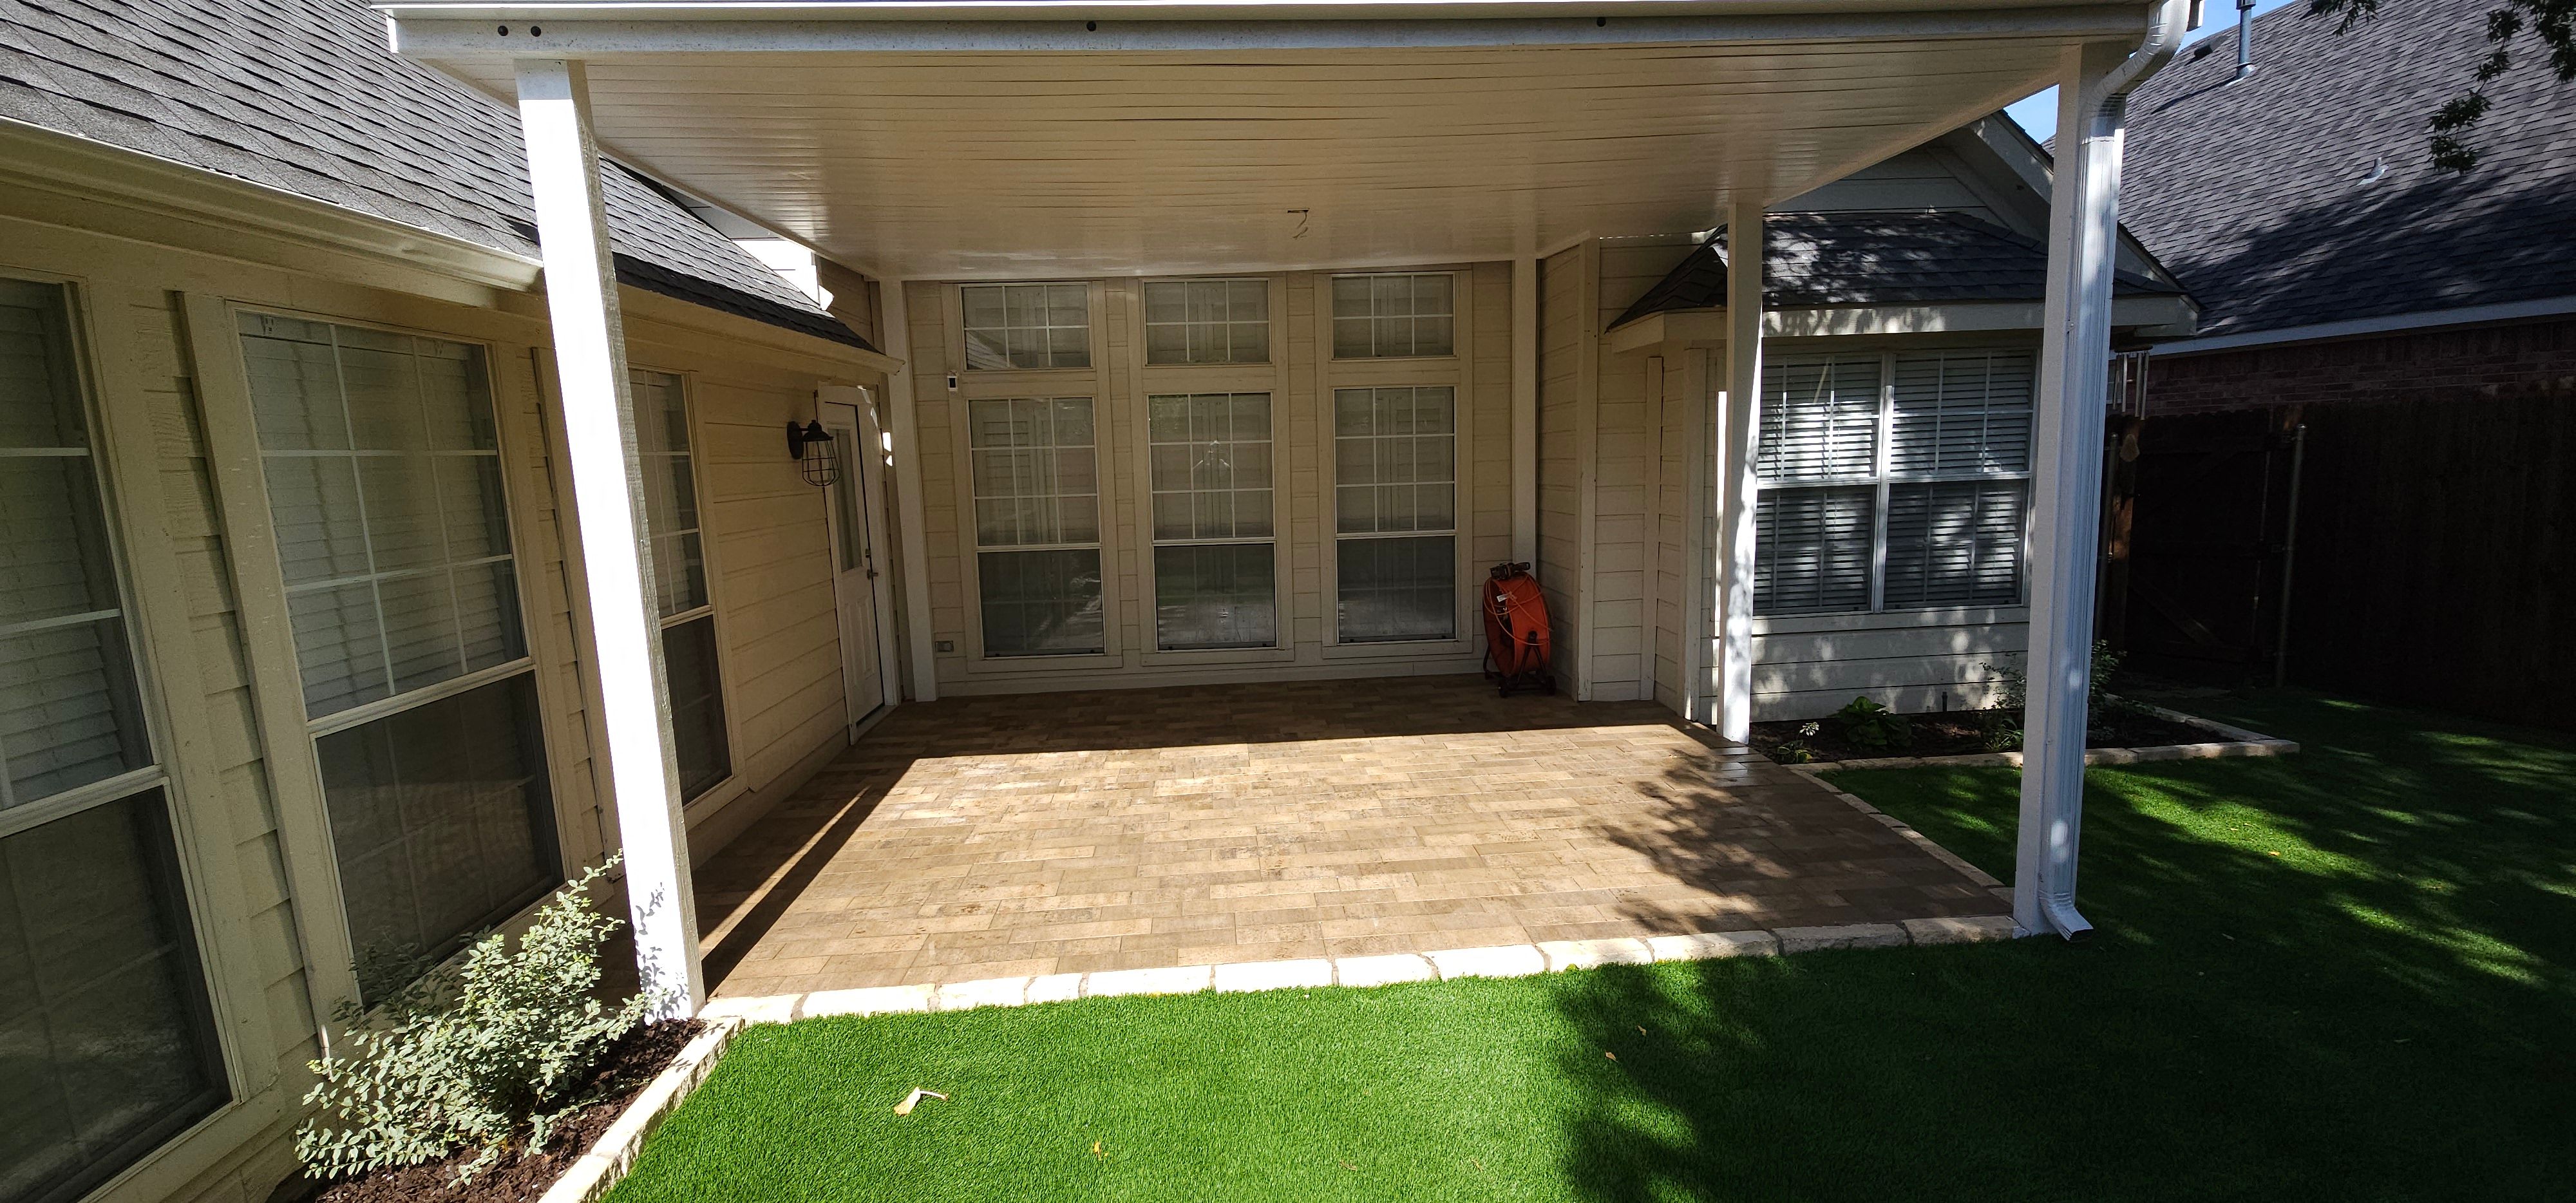 All Photos for Bryan's Landscaping in Arlington, TX